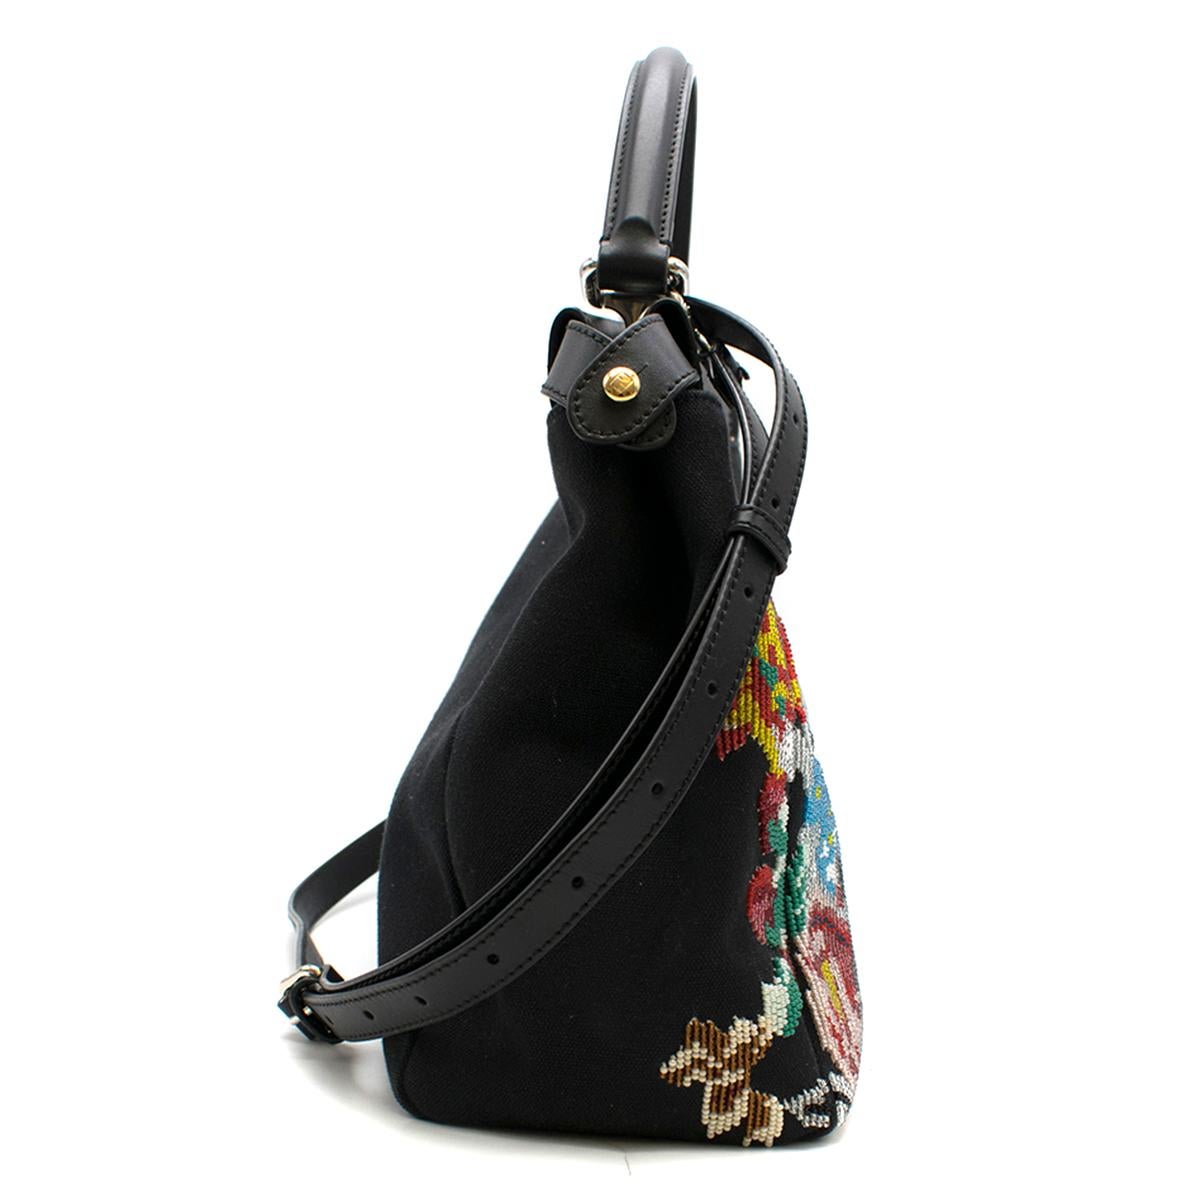 Fendi Black Floral Beaded Canvas Peekaboo Bag 

- Black Top Handle Bag
- Woven canvas outer with multi colored floral bead pattern at front bottom
- Leather top edge and base 
- Single leather handle with silver and gold toned hardware 
- Dual twist